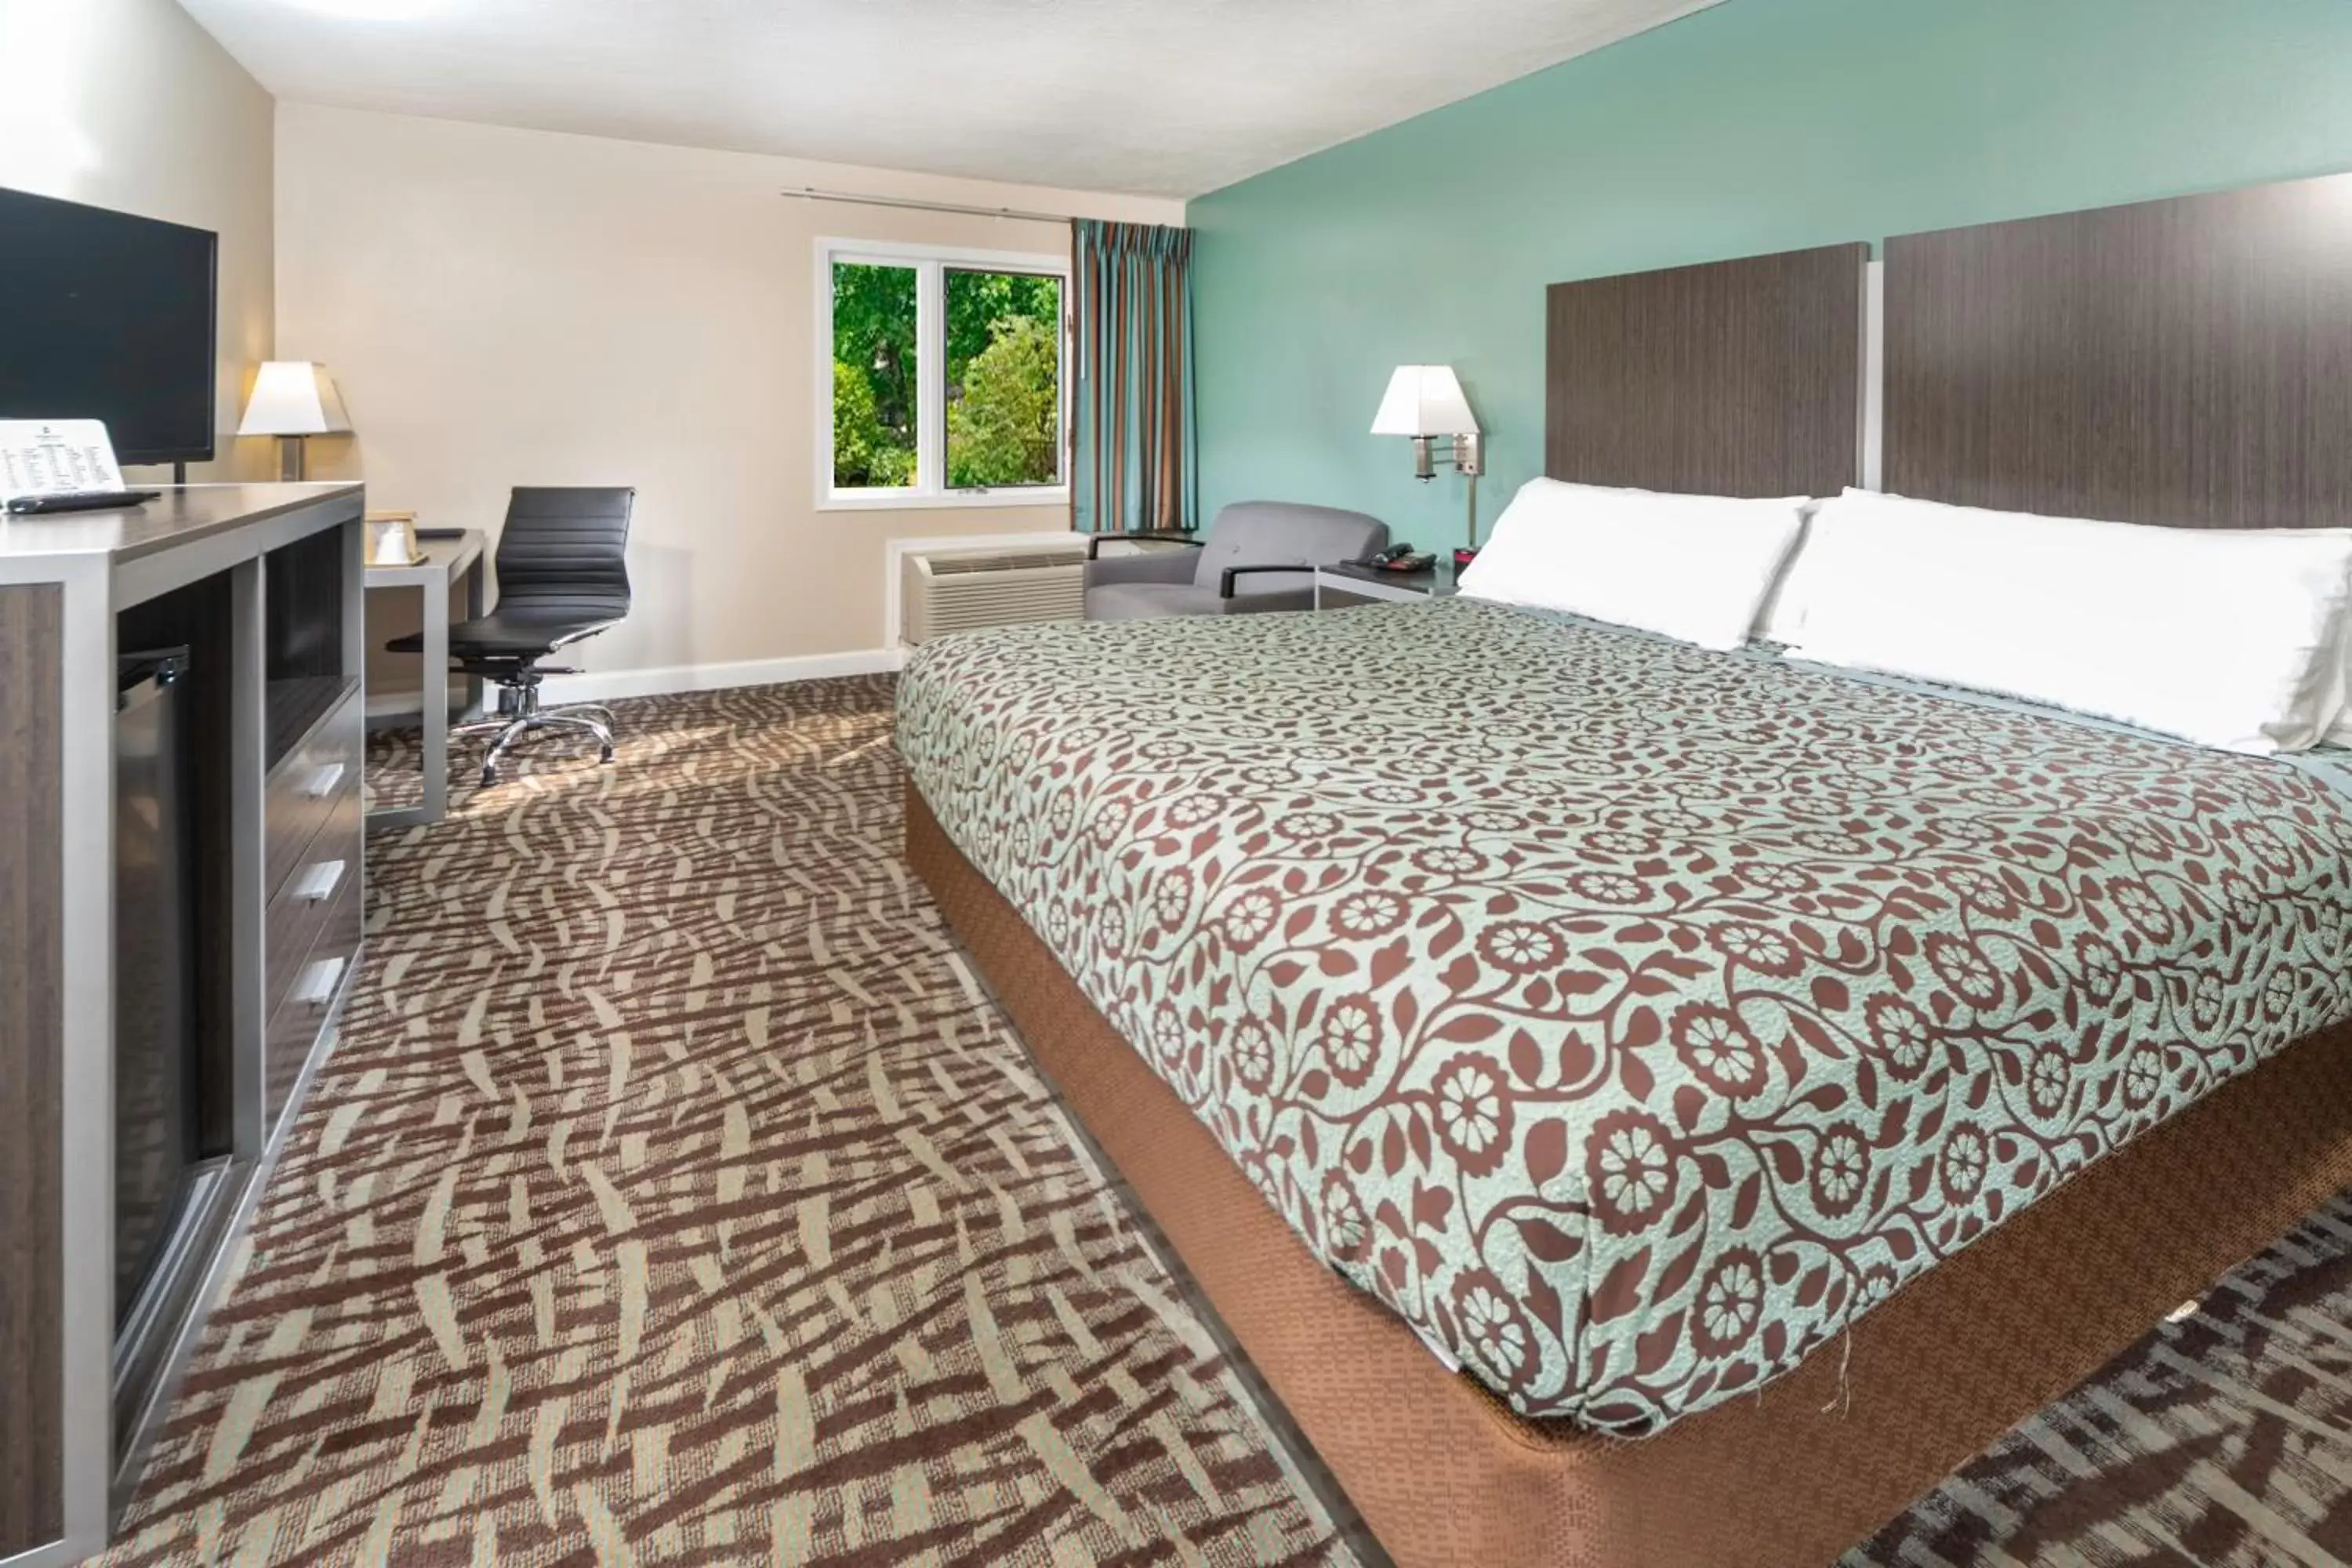 Bed, Room Photo in BridgePointe Inn & Suites by BPhotels, Council Bluffs, Omaha Area